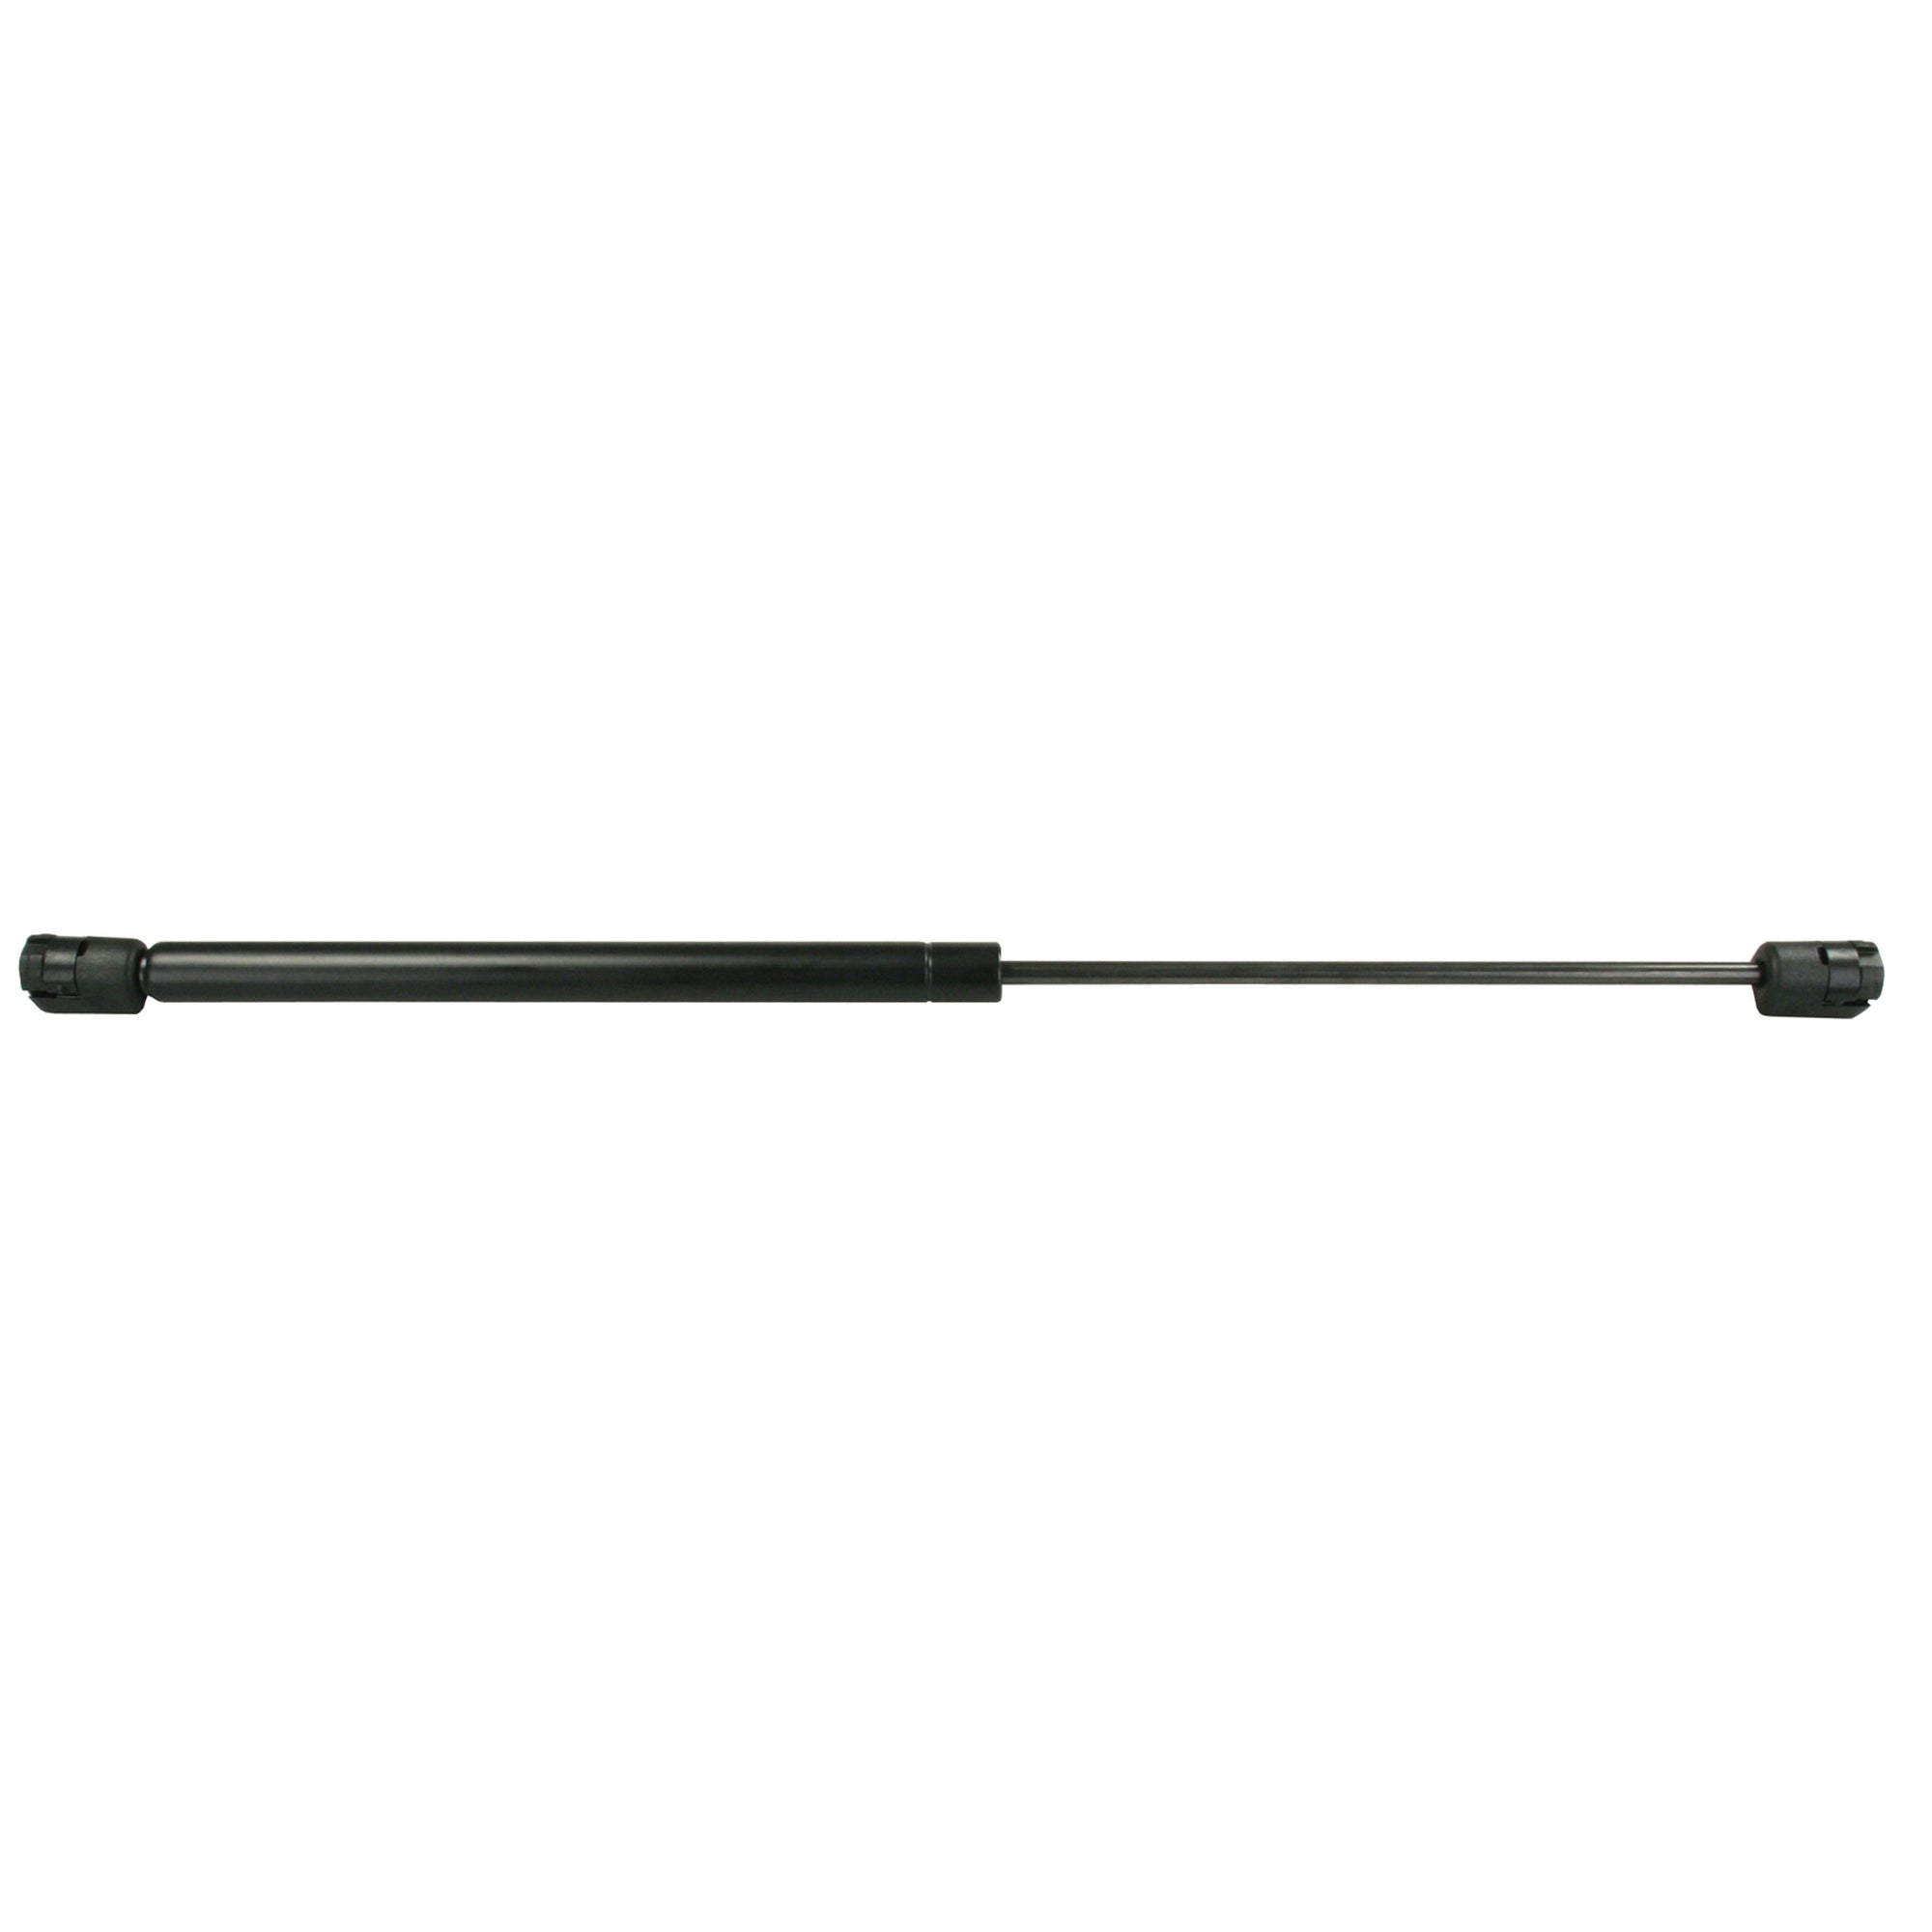 JR Products GSNI-4032-28 Gas Spring